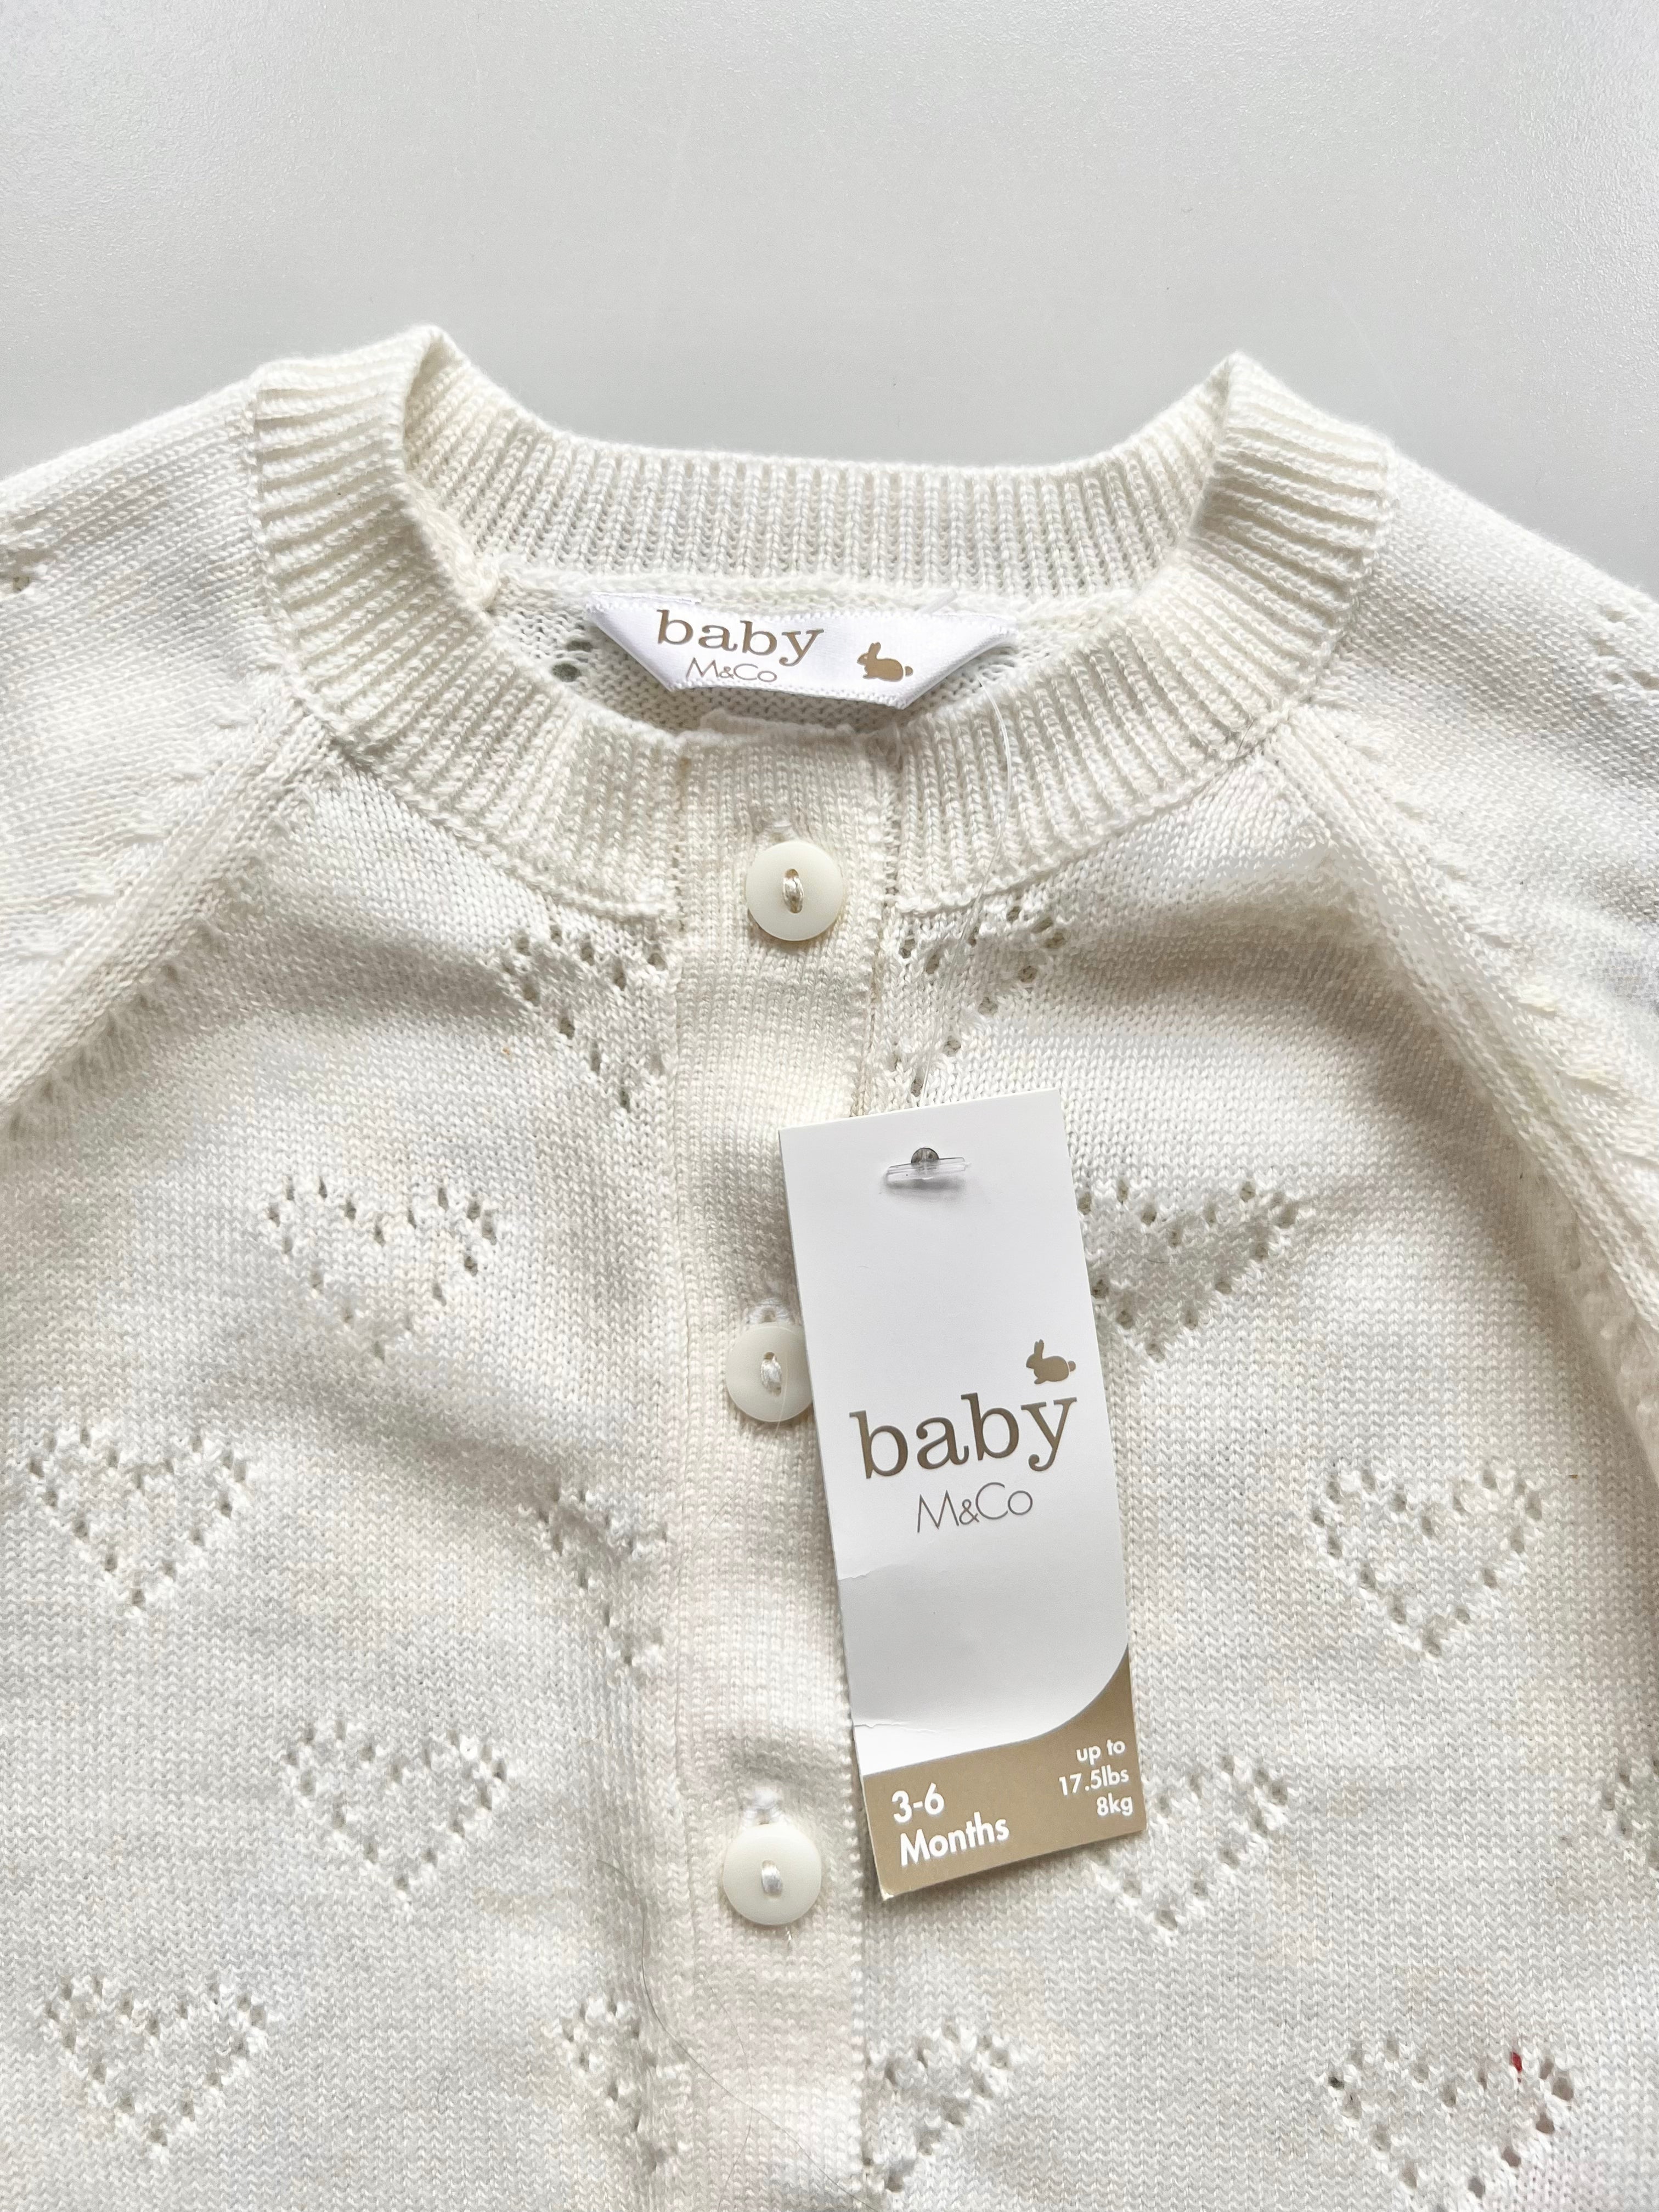 M&Co Baby Cardigan 3-6 Months